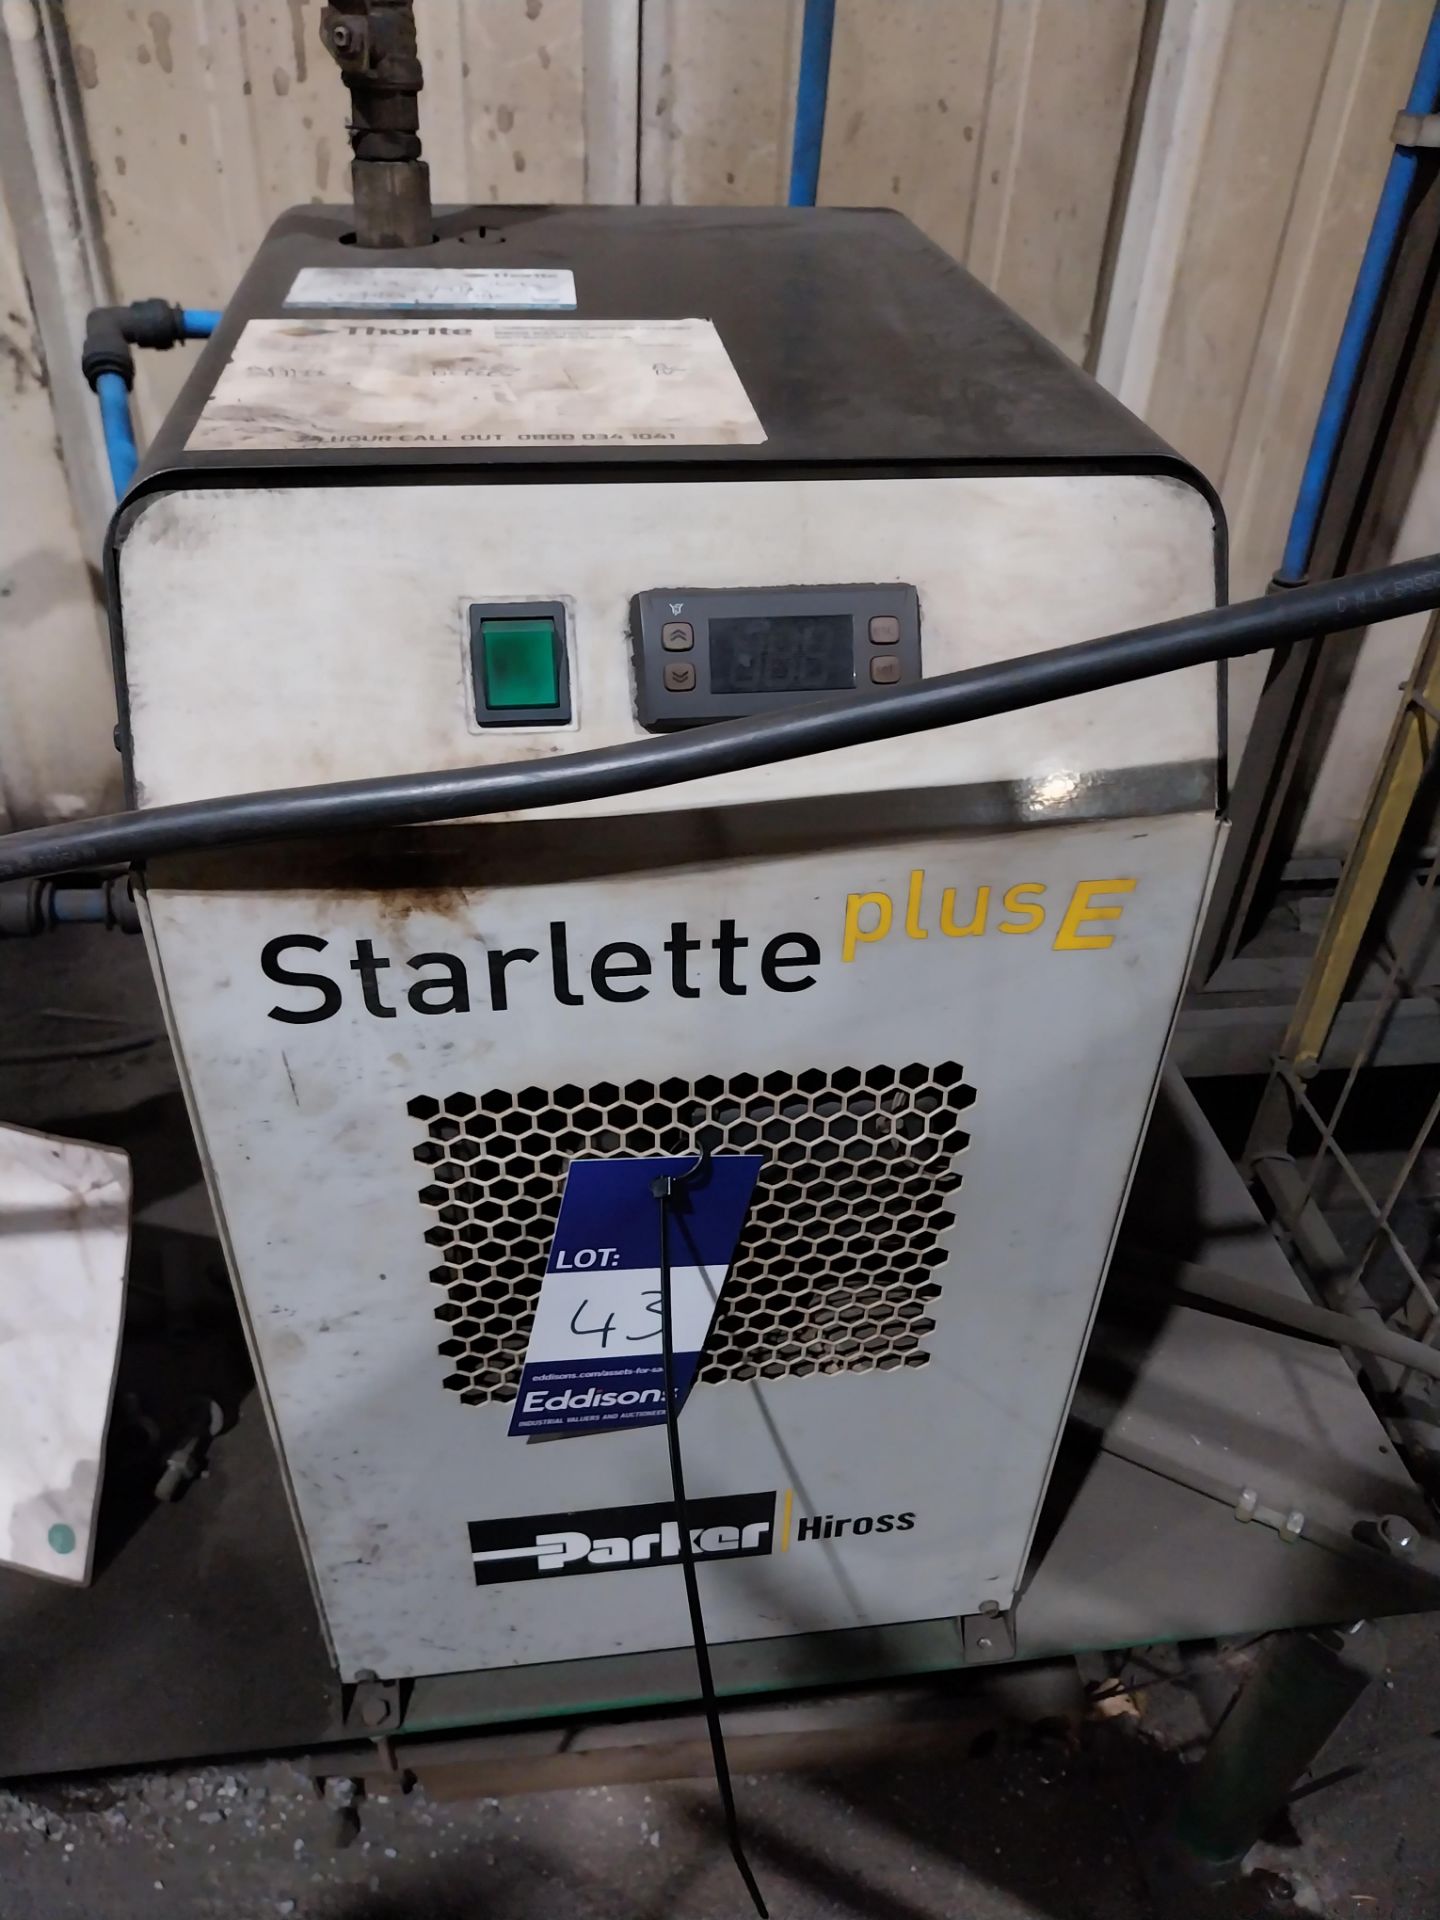 Parker Starlette Plus E small to medium flow compressed air refrigeration dryer - Image 2 of 3